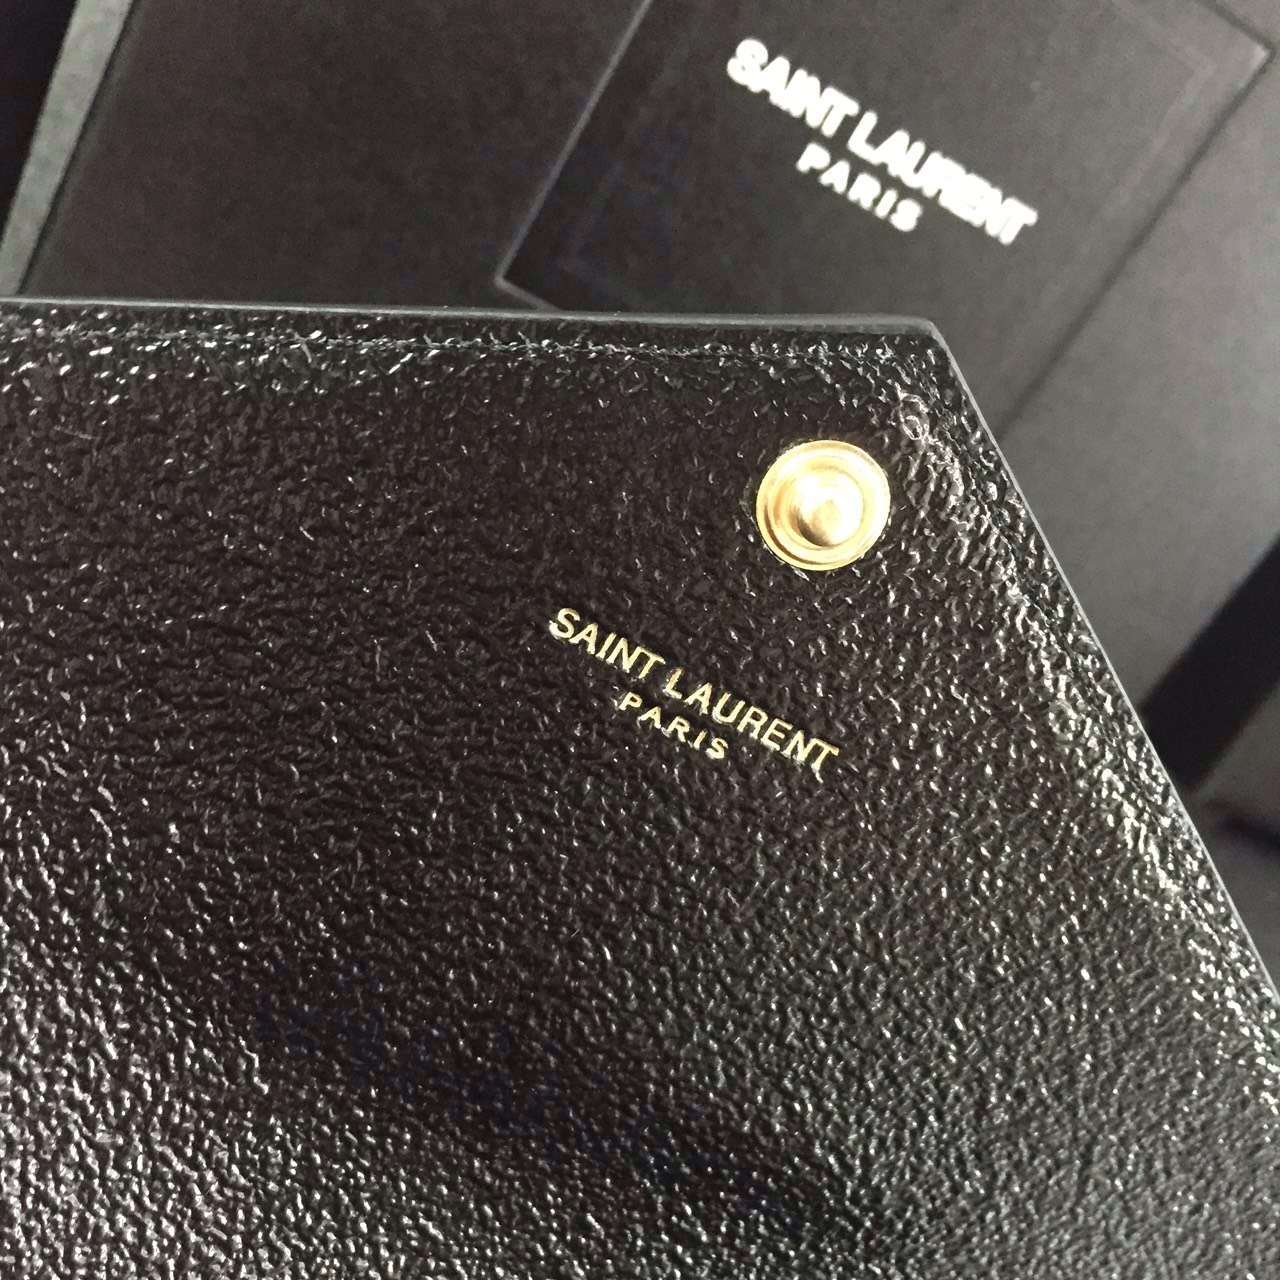 2016 Cheap YSL Out Sale with Free Shipping-Saint Laurent Monogram Envelope Chain Wallet in Black Grain Leather - Click Image to Close